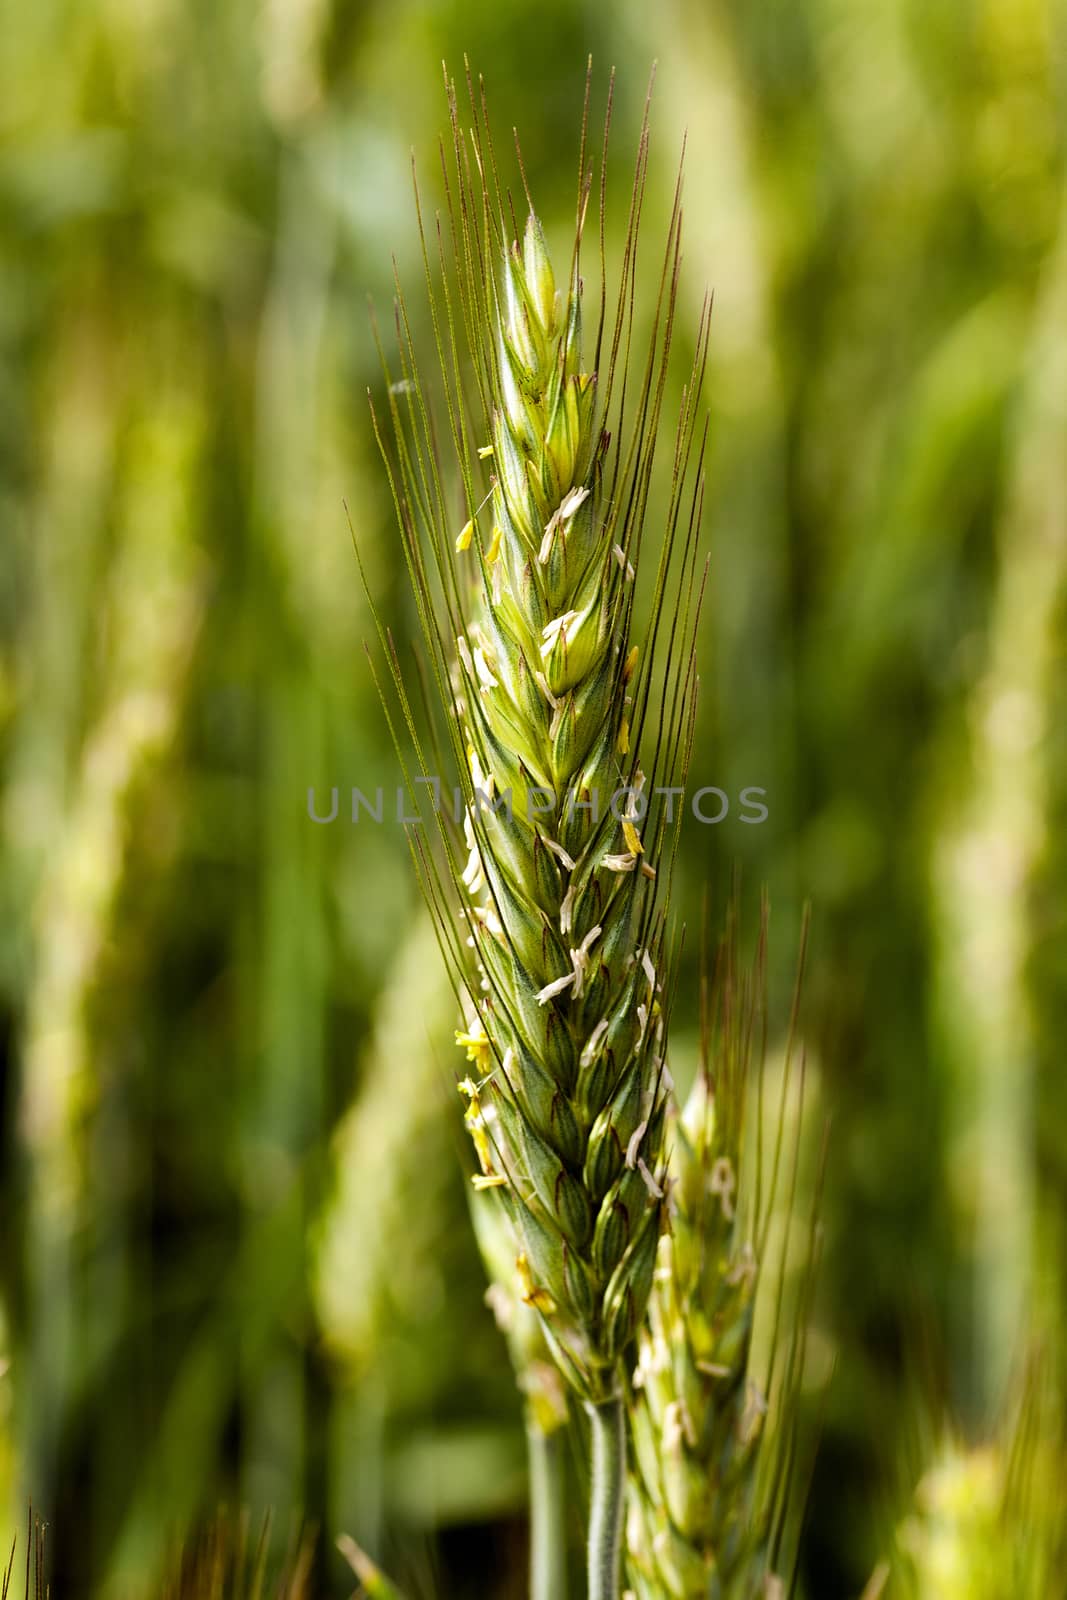   photographed close up green immature cereals. spring